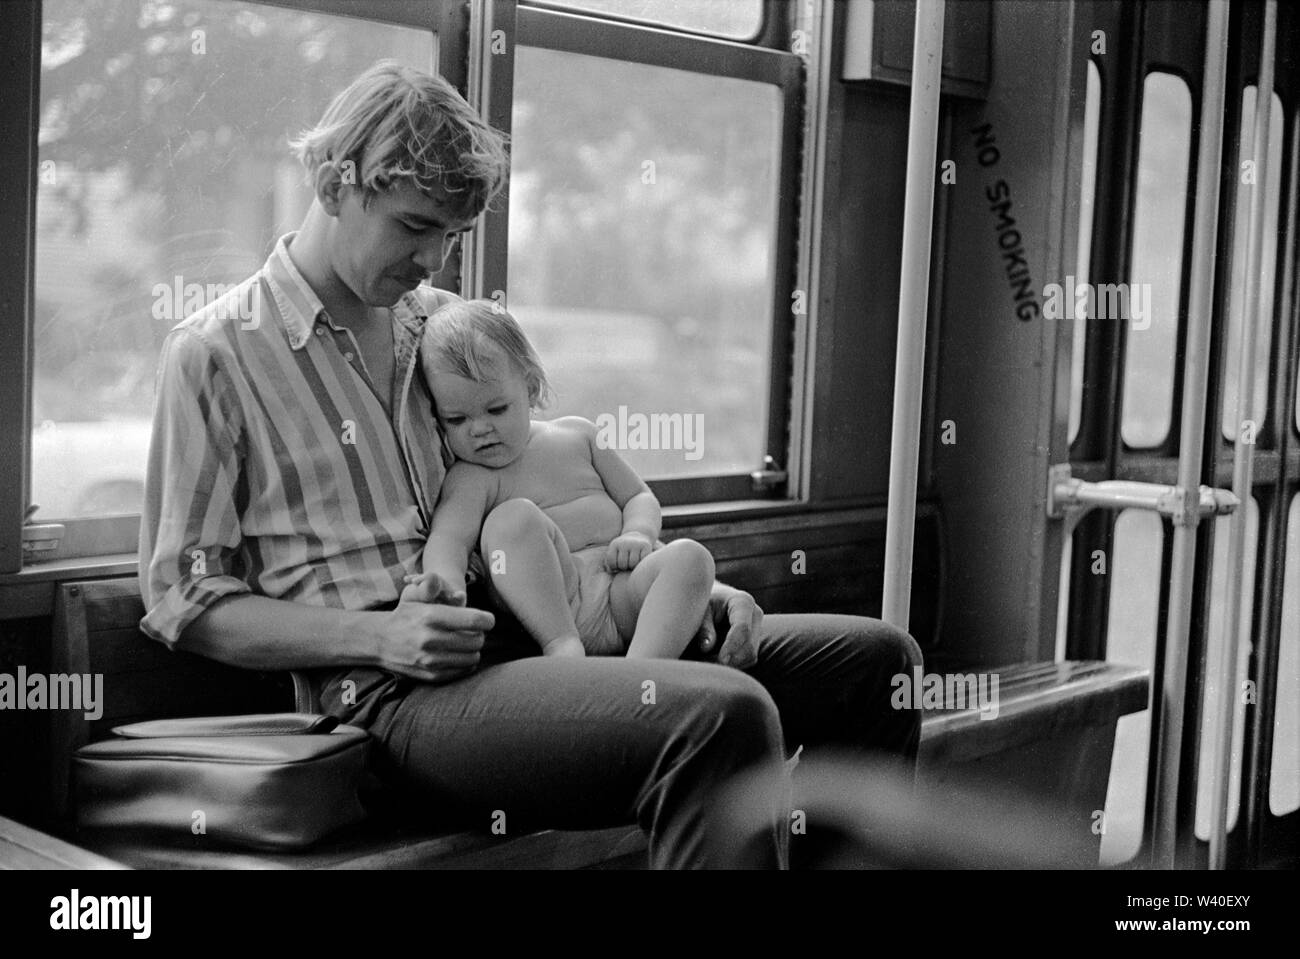 Father and baby child hot and humid weather parent bonding with new baby New Orleans, Louisiana 1969, USA 60s US HOMER SYKES Stock Photo